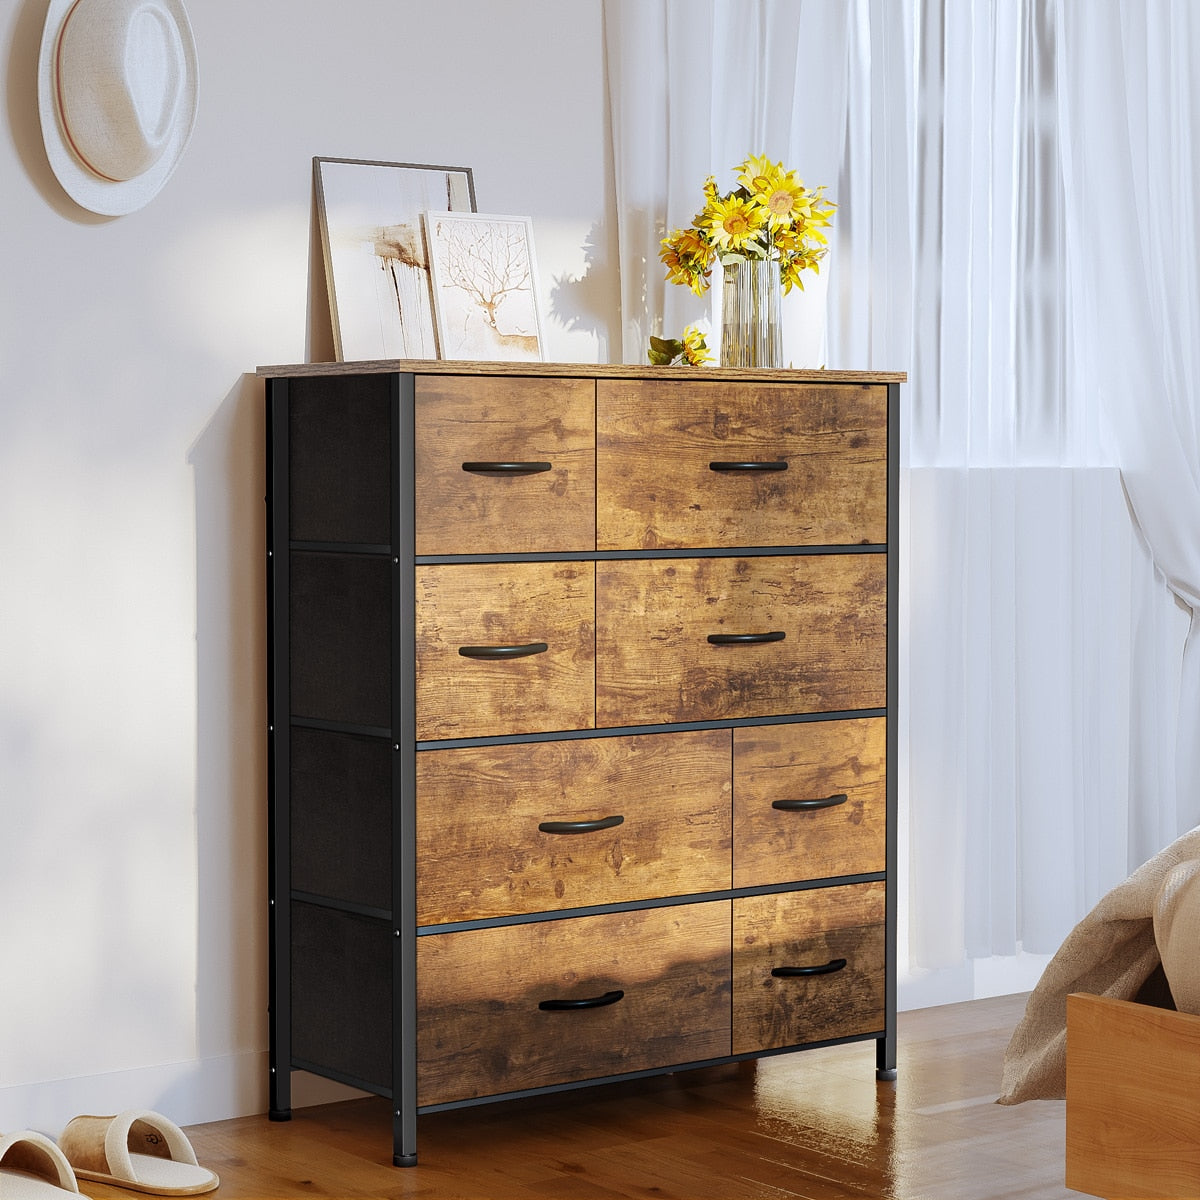 EnHomee 8 Drawer Dresser for Bedroom Fabric Dressers & Chest of Drawers with Wood Top Tall Dresser Near the Bed Storage Cabinet